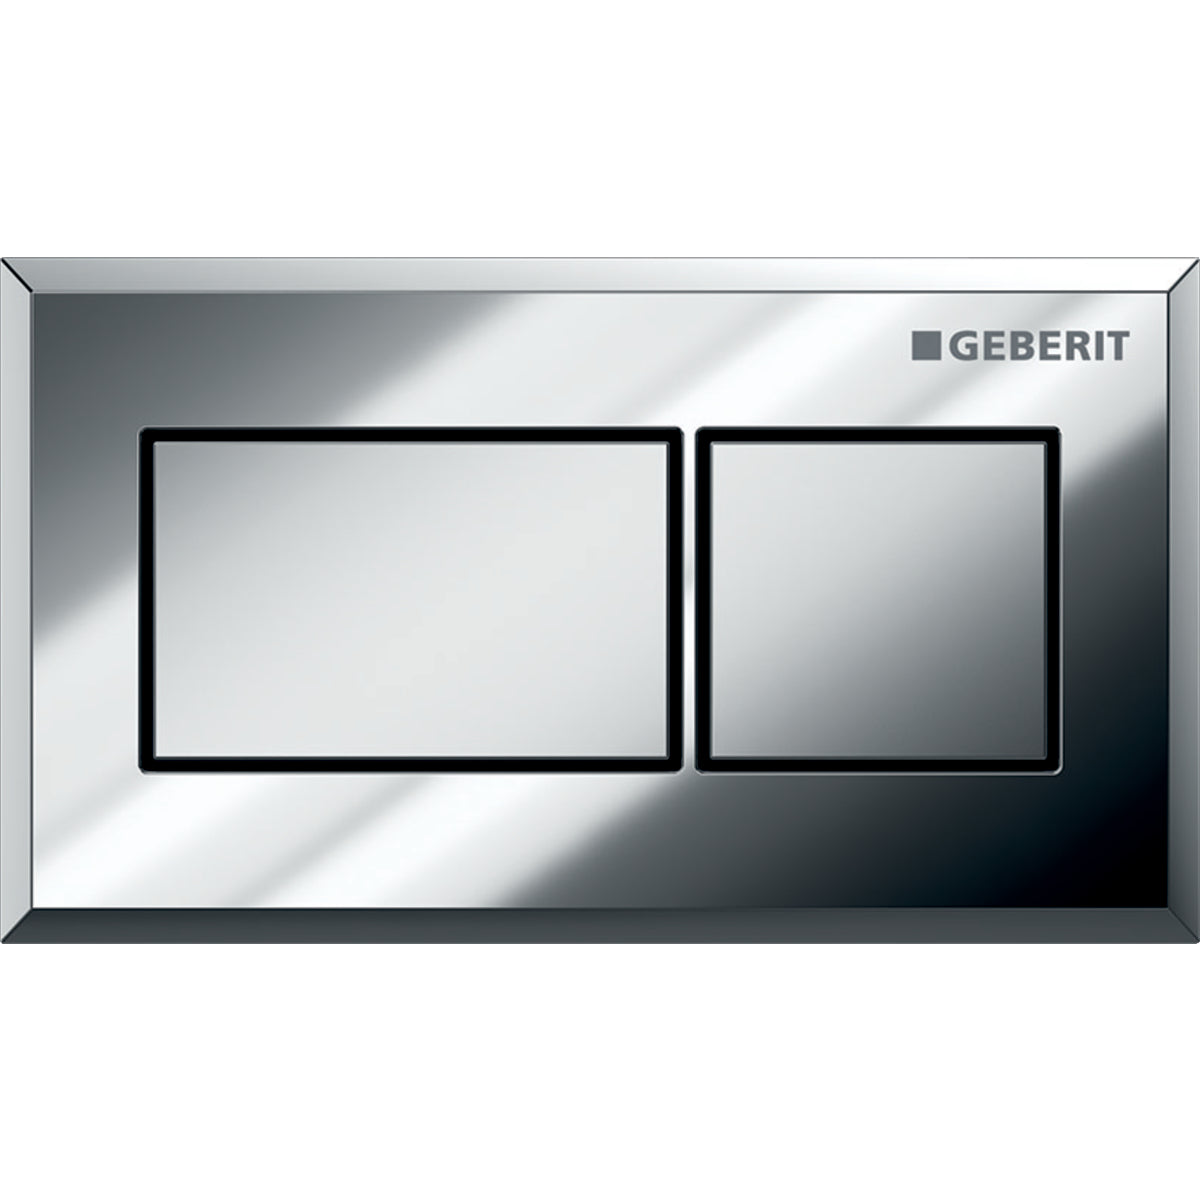 Geberit 116.051.KA.1- Geberit remote flush actuation, square design, pneumatic, for dual flush, concealed actuator: bright chrome-plated, matt chrome-plated - FaucetExpress.ca